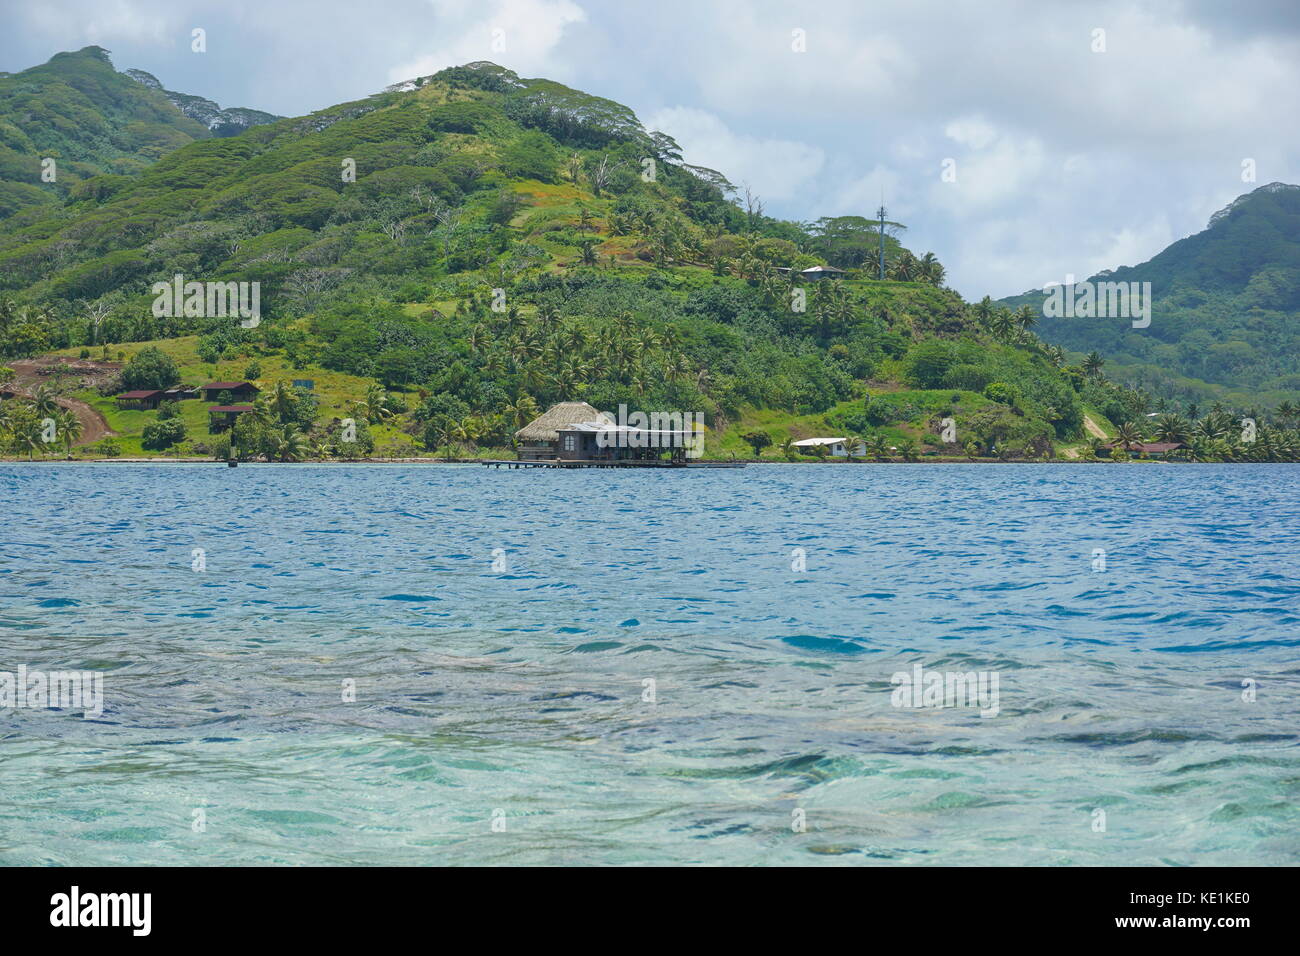 South Pacific island Huahine in French Polynesia coastline with a pearl oyster farm over water in the lagoon Stock Photo